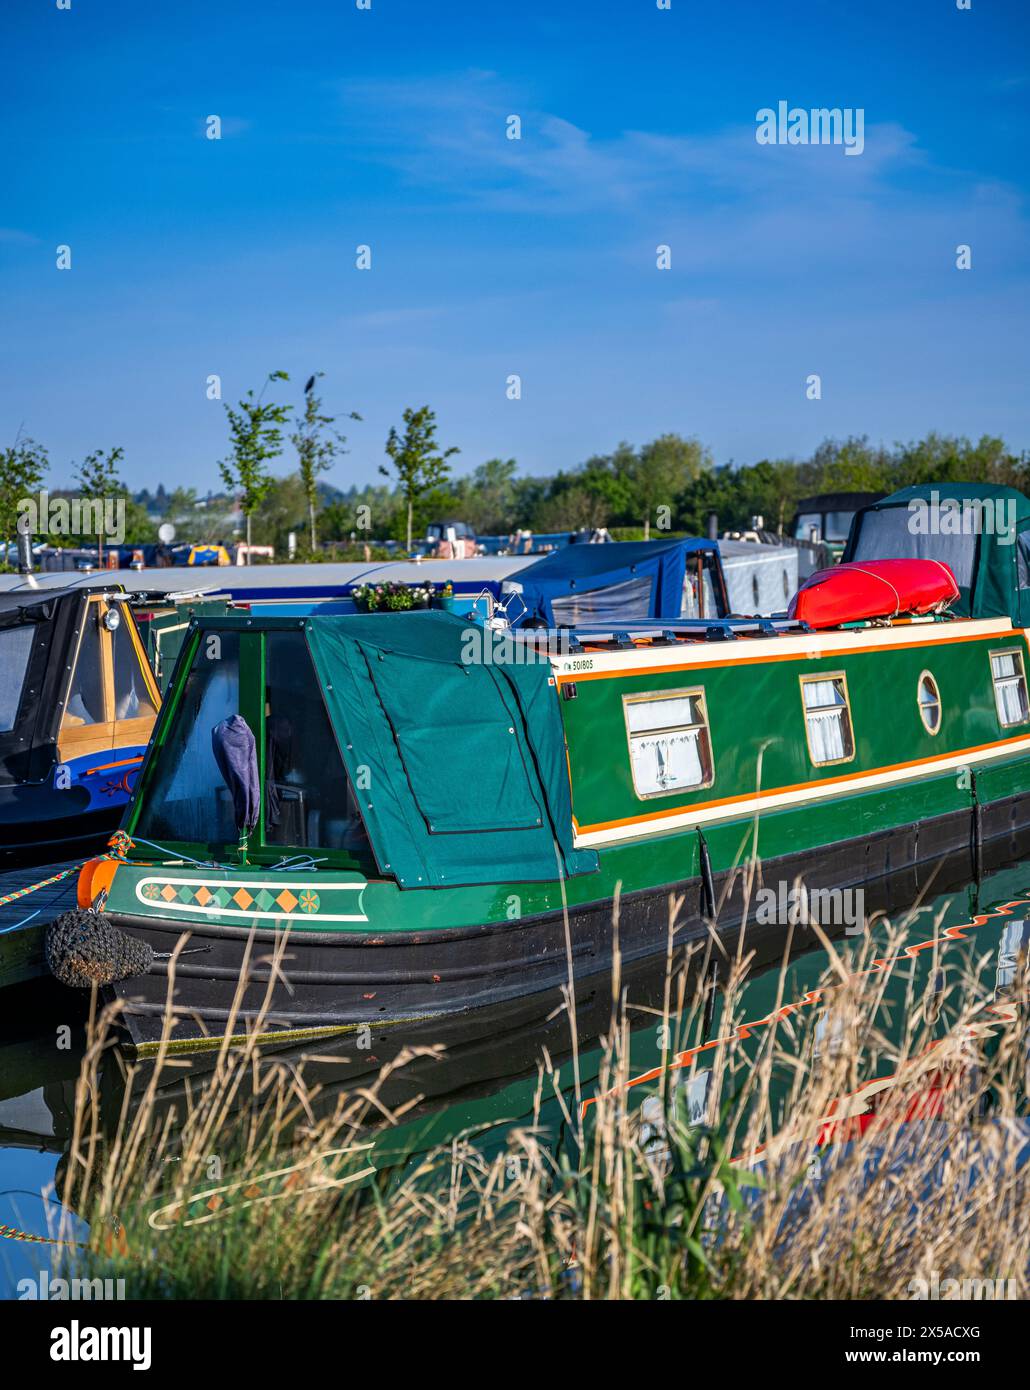 Dunchurch Pools Marina, Warwickshire, Oxford Canal – Summer morning  narrowboats in tranquil surroundings against a clear blue sky Stock Photo